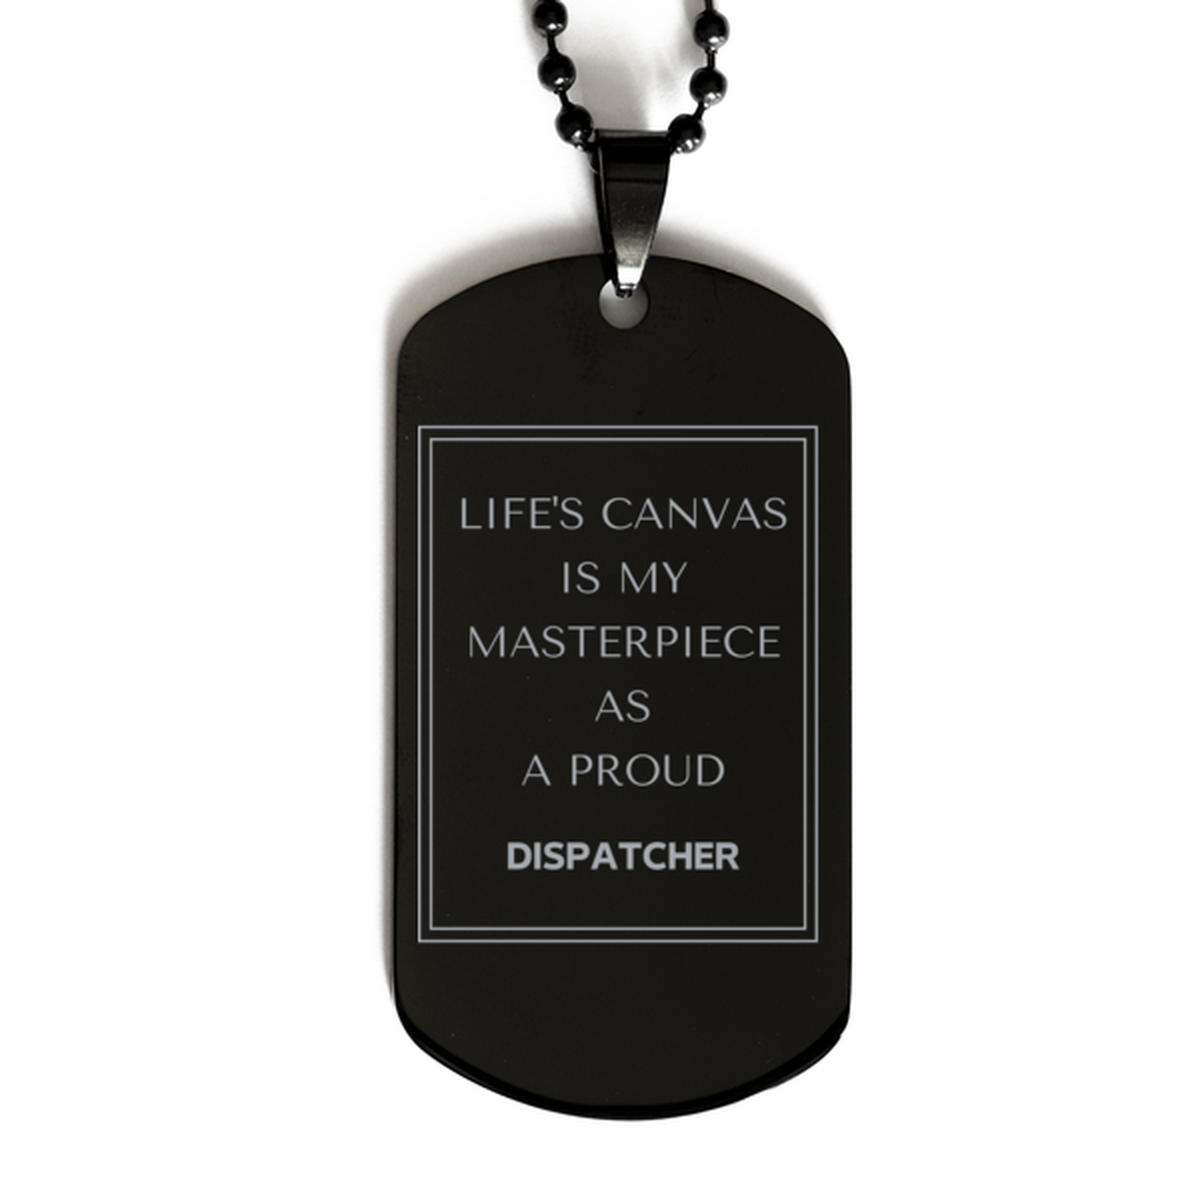 Proud Dispatcher Gifts, Life's canvas is my masterpiece, Epic Birthday Christmas Unique Black Dog Tag For Dispatcher, Coworkers, Men, Women, Friends